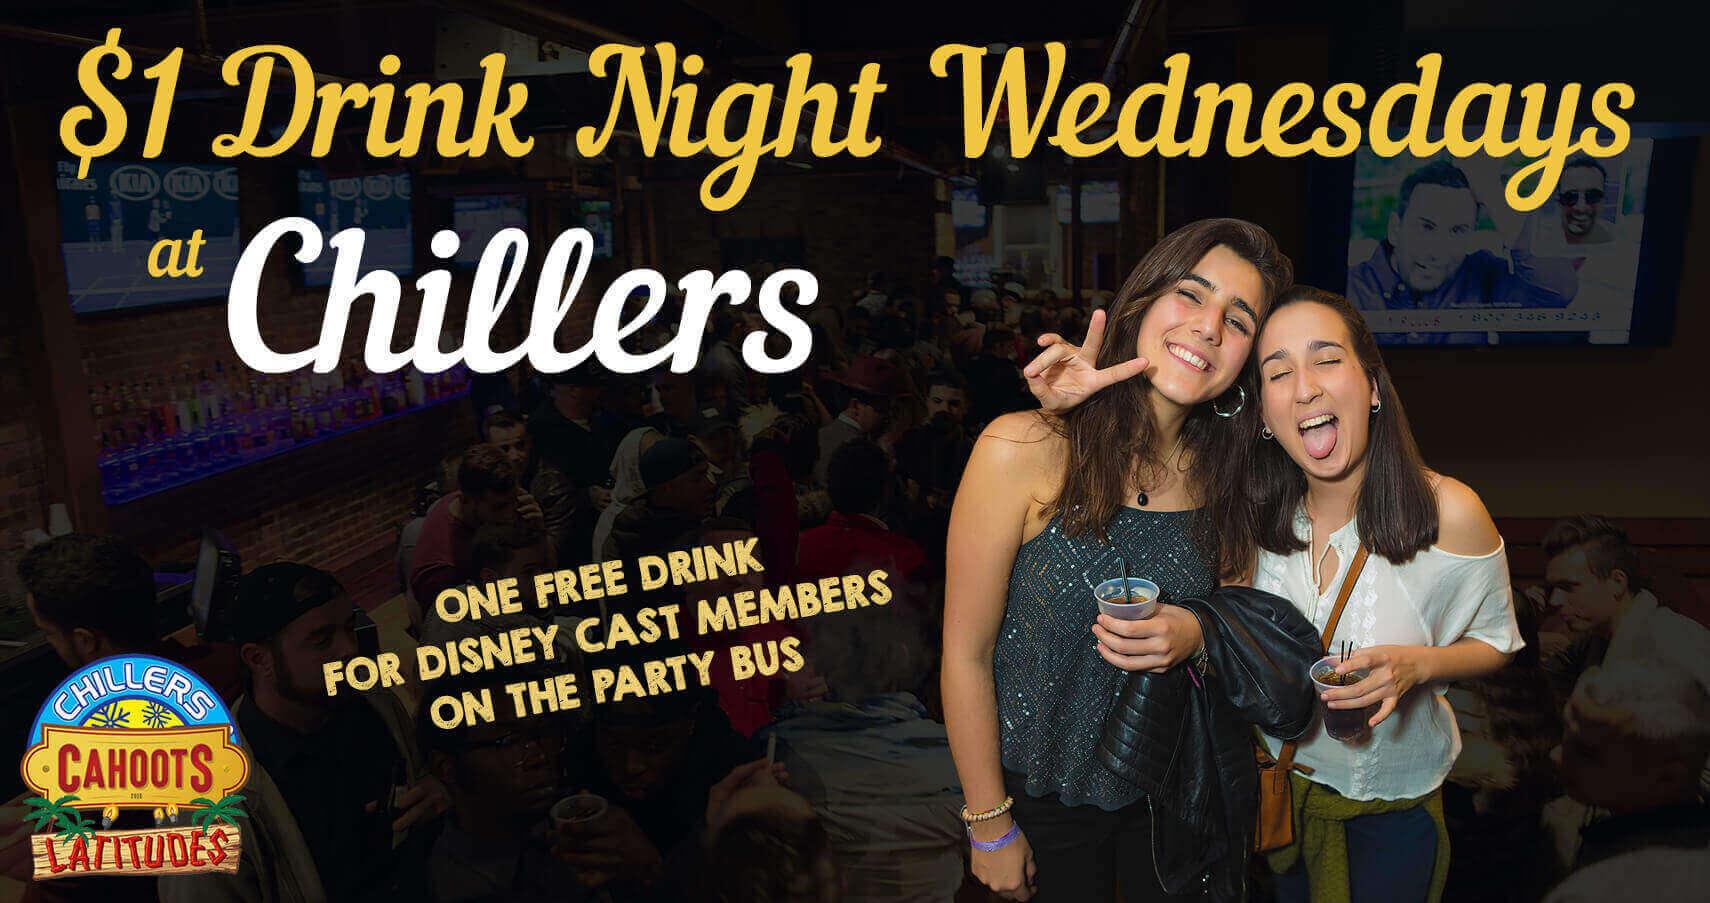 Wednesdays at Chillers, I Bar, Tier, & more